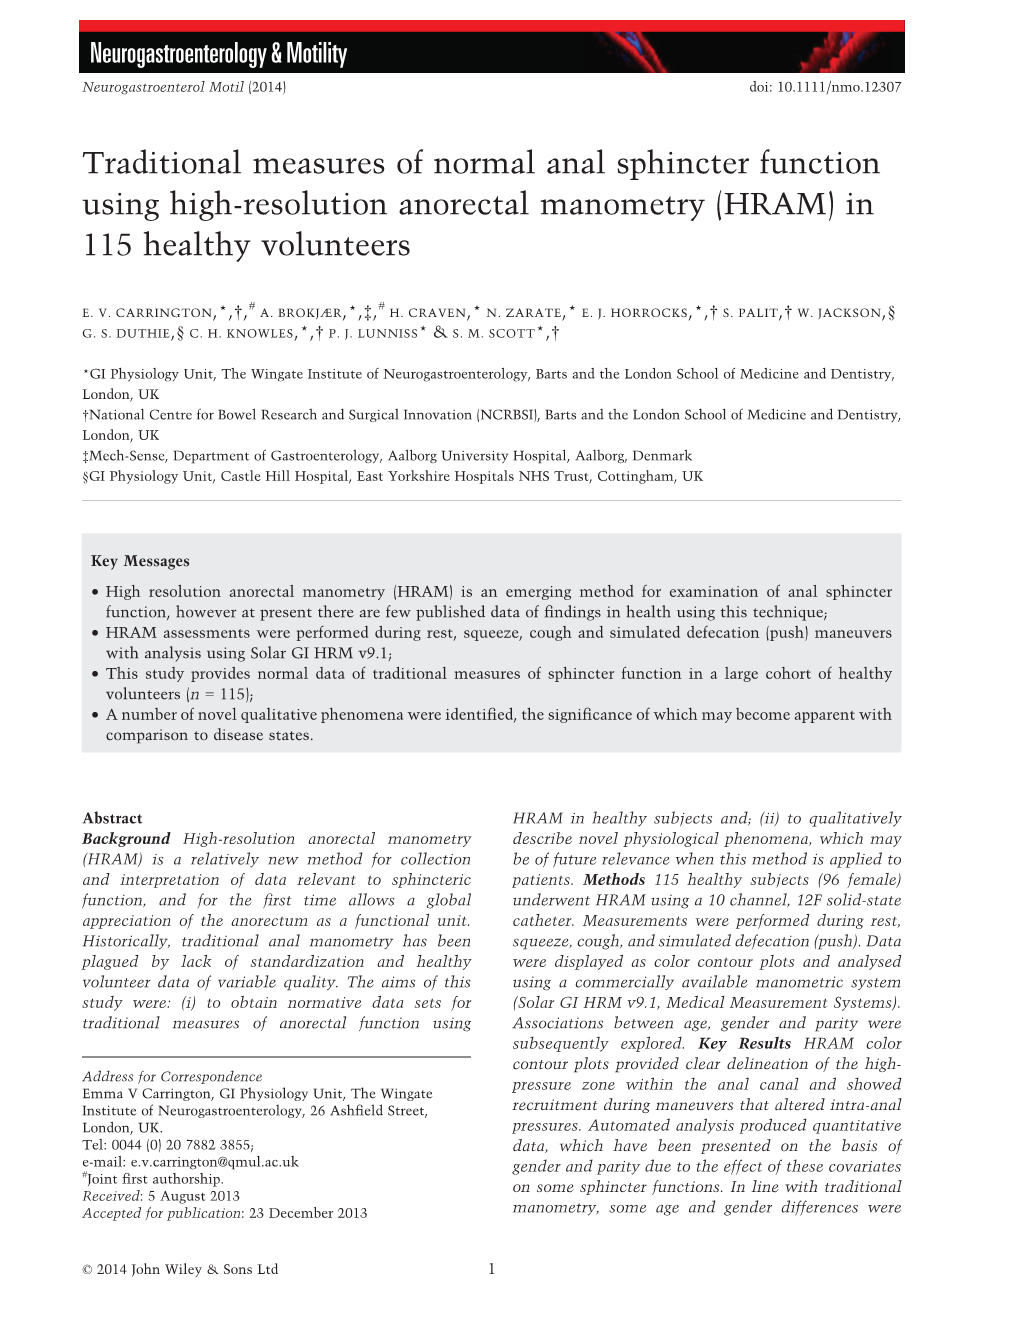 Traditional Measures of Normal Anal Sphincter Function Using High-Resolution Anorectal Manometry (HRAM) in 115 Healthy Volunteers